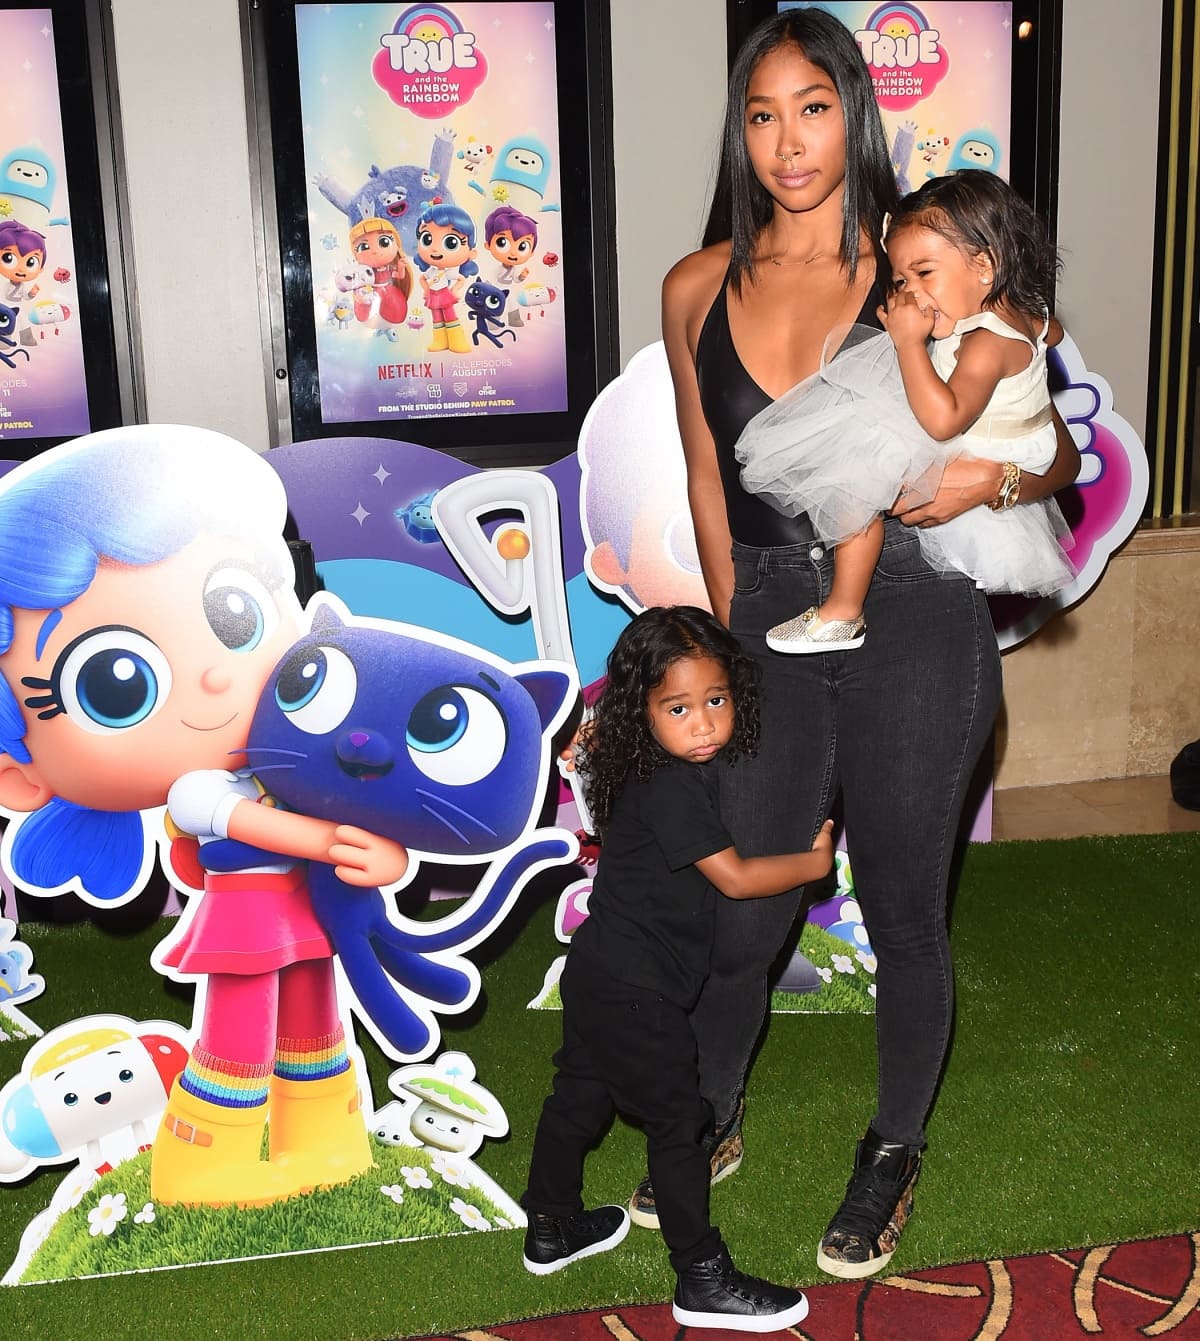 Apryl Jones with children Megaa and A’mei at the premiere of TRUE and the RAINBOW KINGDOM hosted by Pharrell Williams